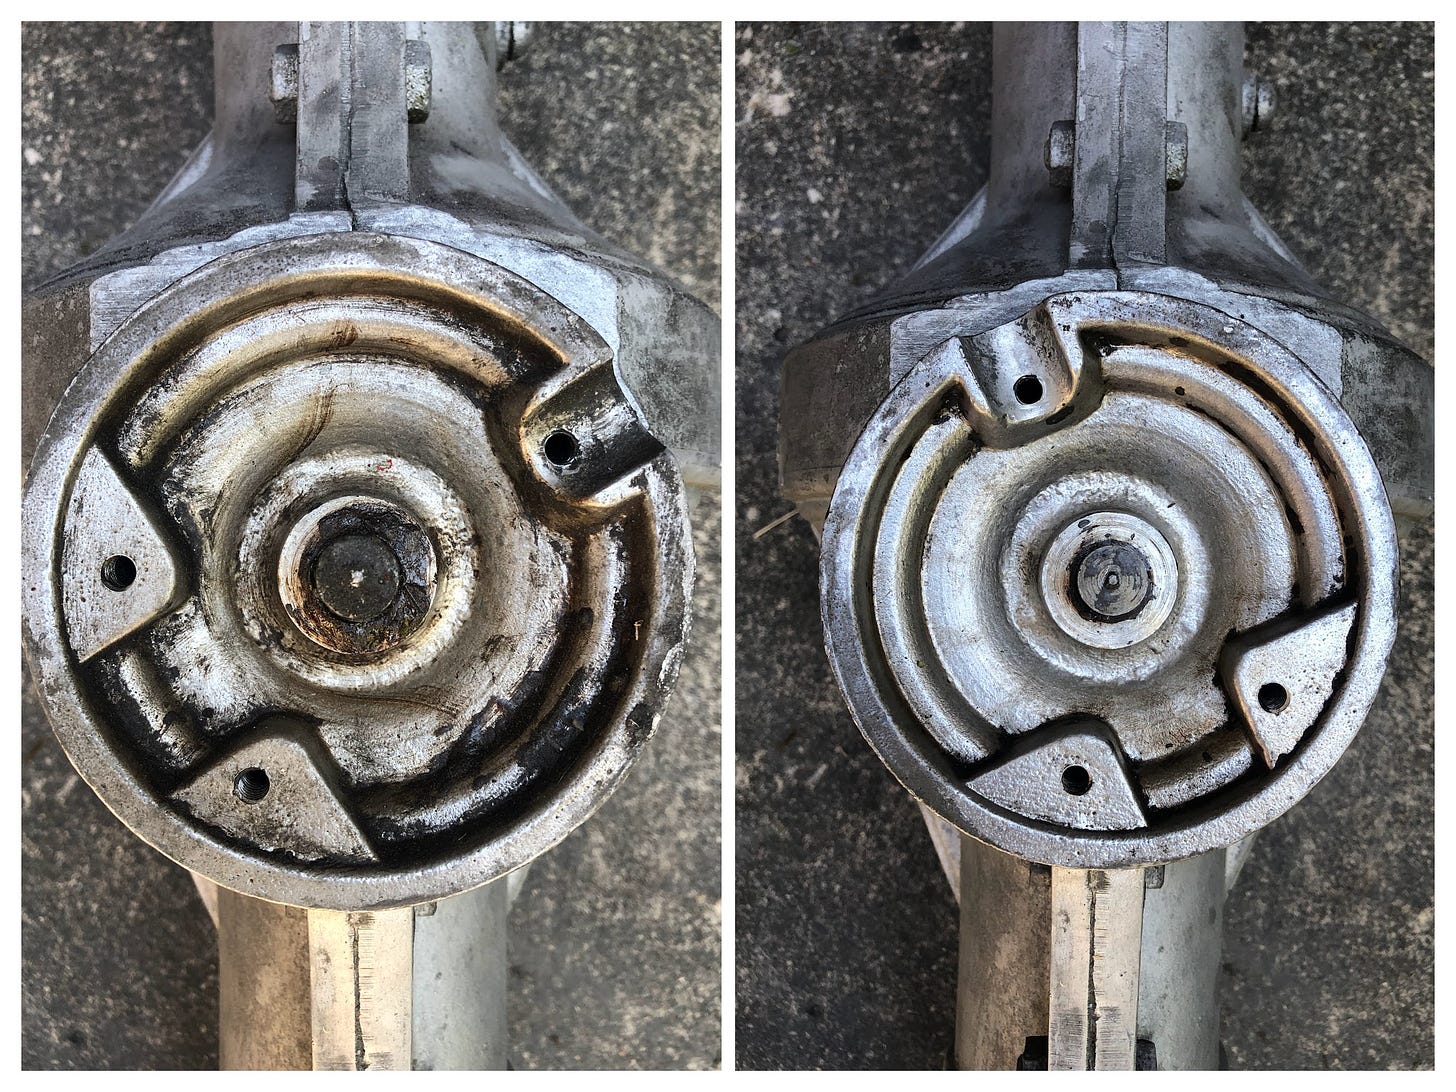 Hills Hoist gear casing before and after degreasing.